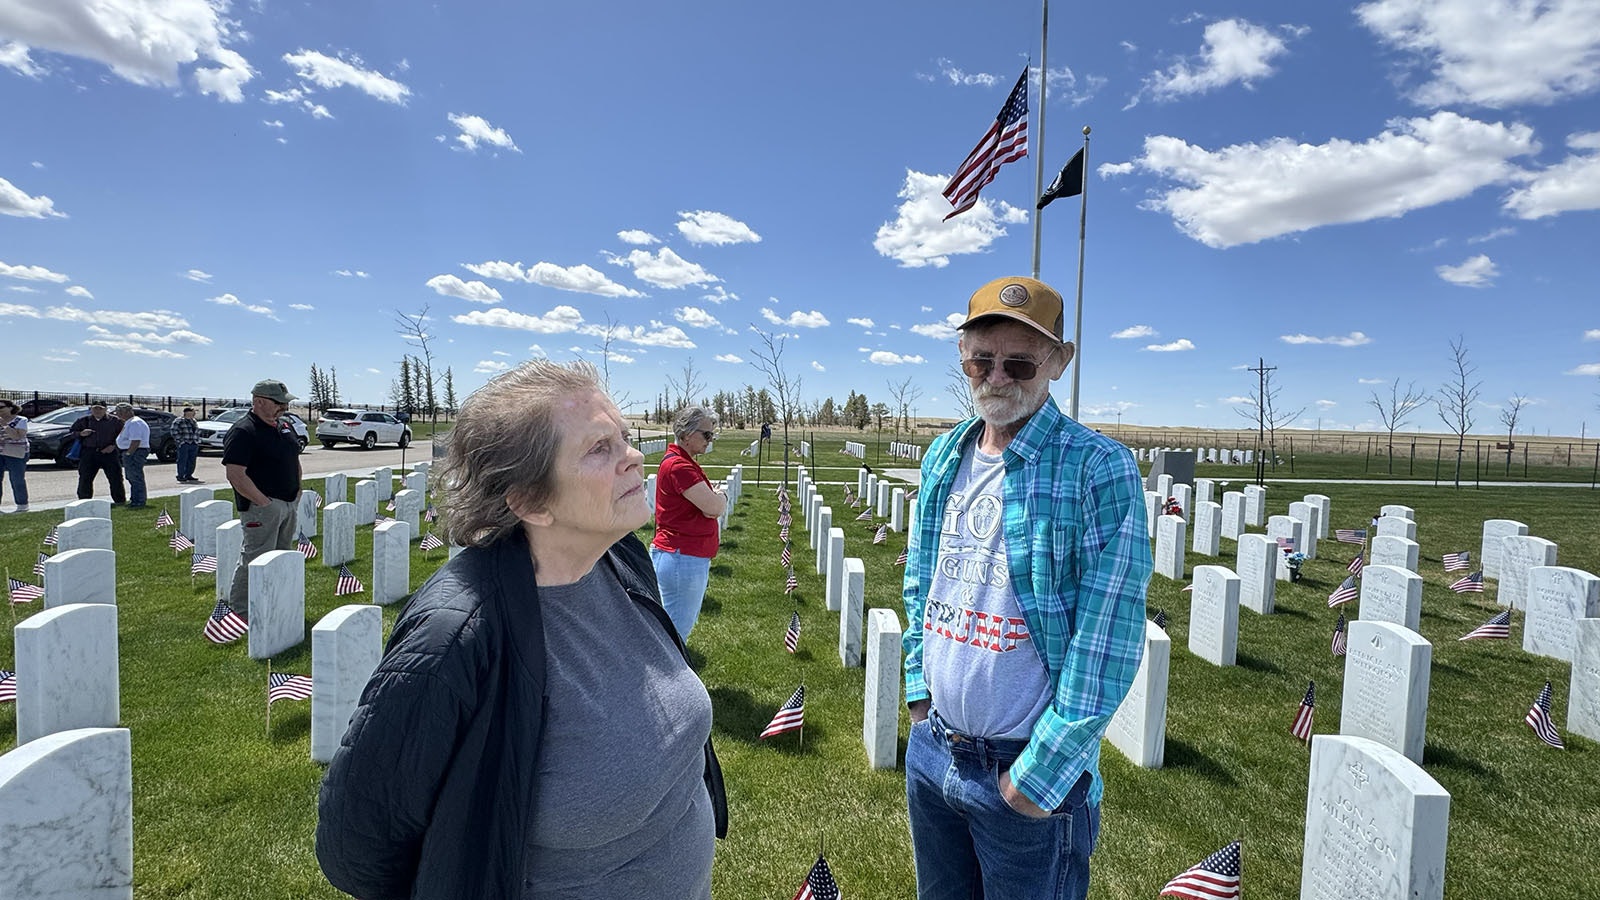 On left, Carol Anne Hopkins and Dale Hopkins, drove four hours from Riverton, Wyoming, to see the burial site of her parents and participate in the observation of fallen military heroes.